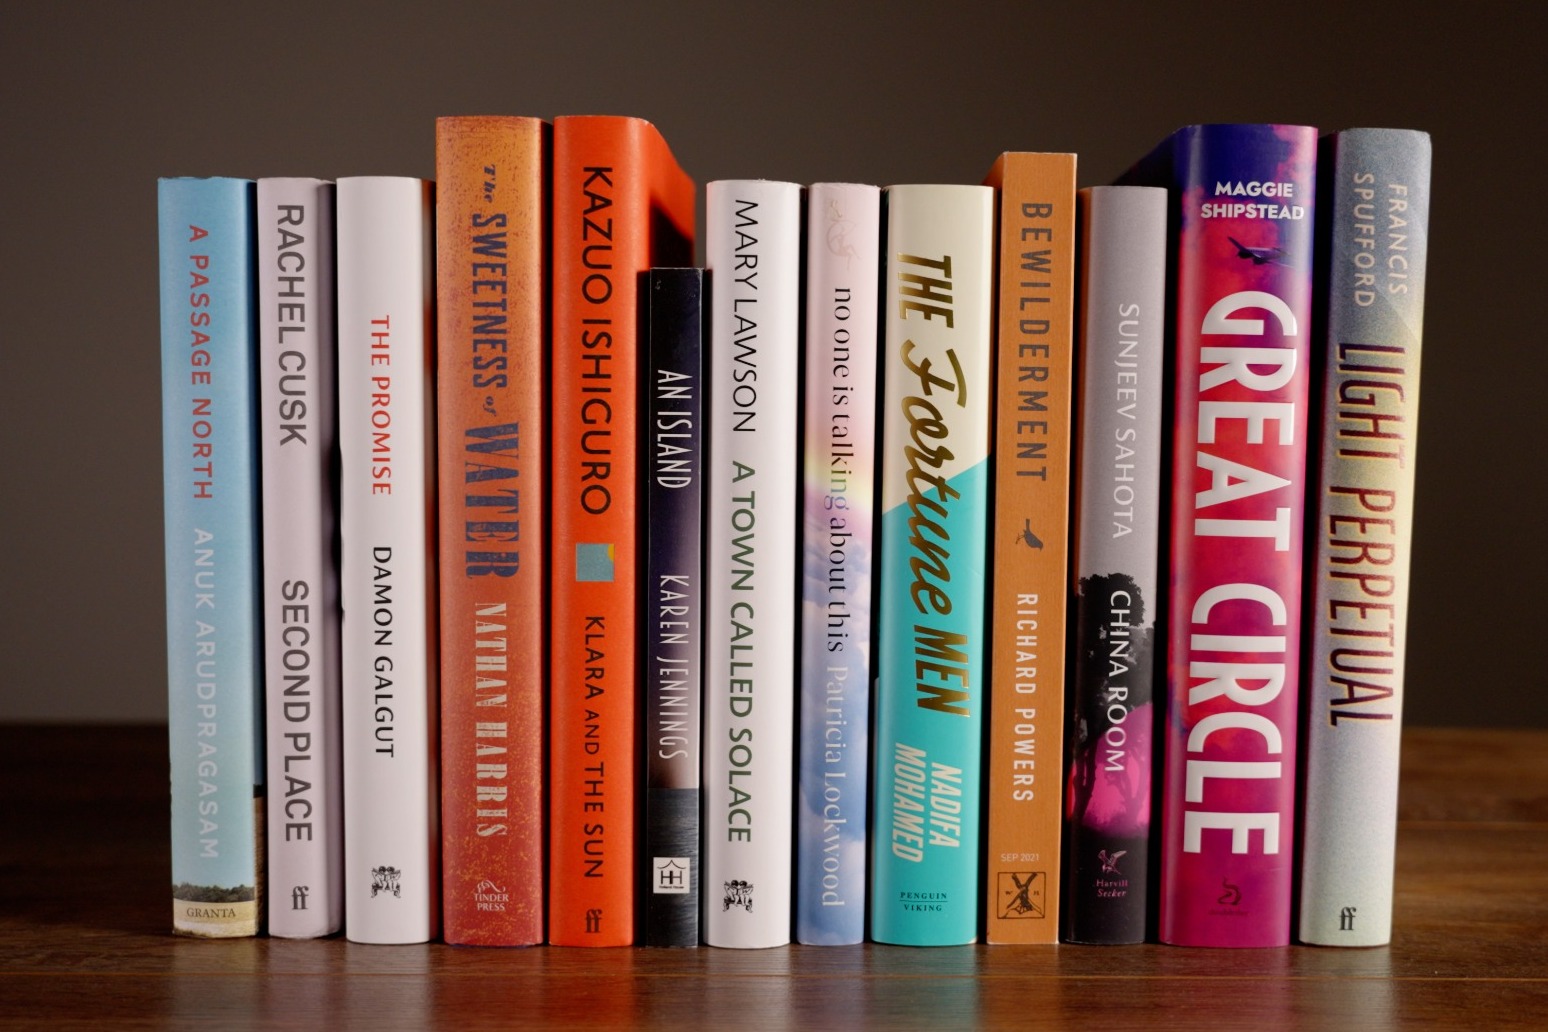 Shortlist announced for 2021 Booker Prize 